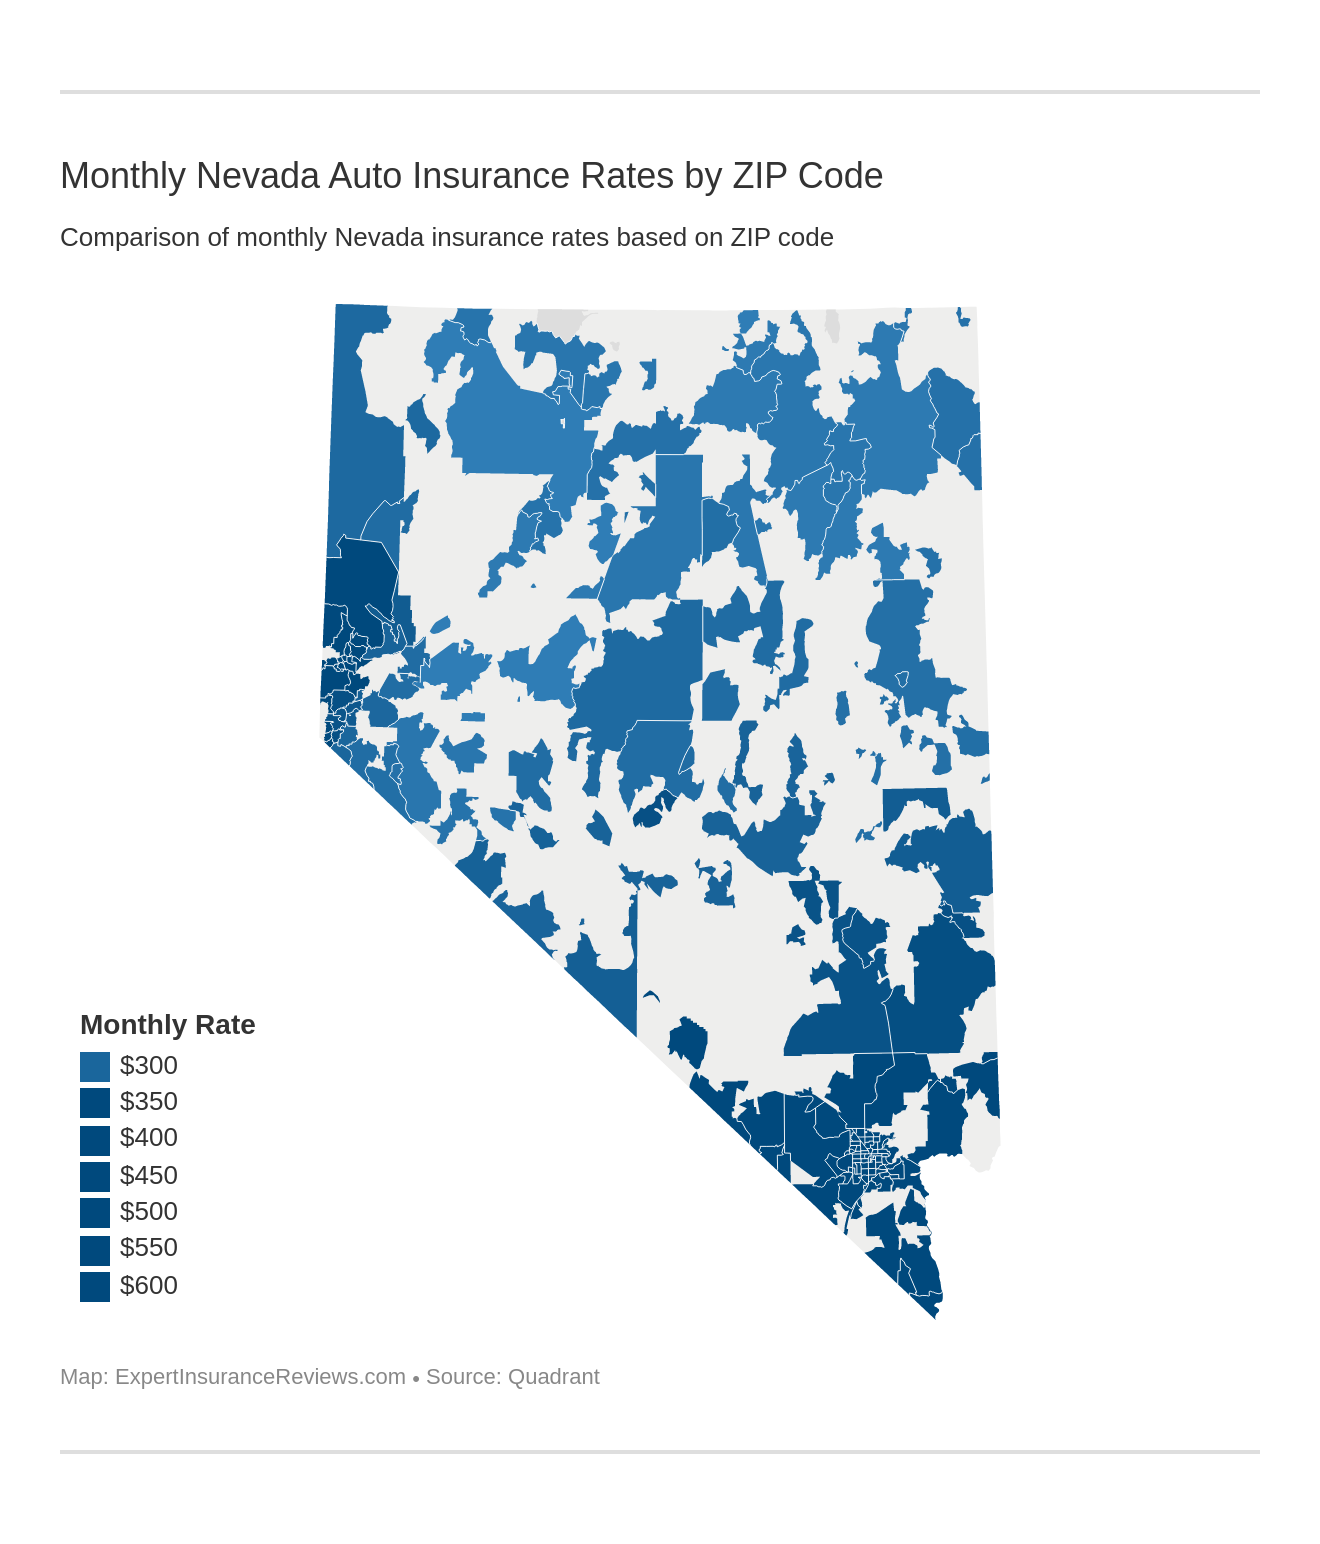 Monthly Nevada Auto Insurance Rates by ZIP Code